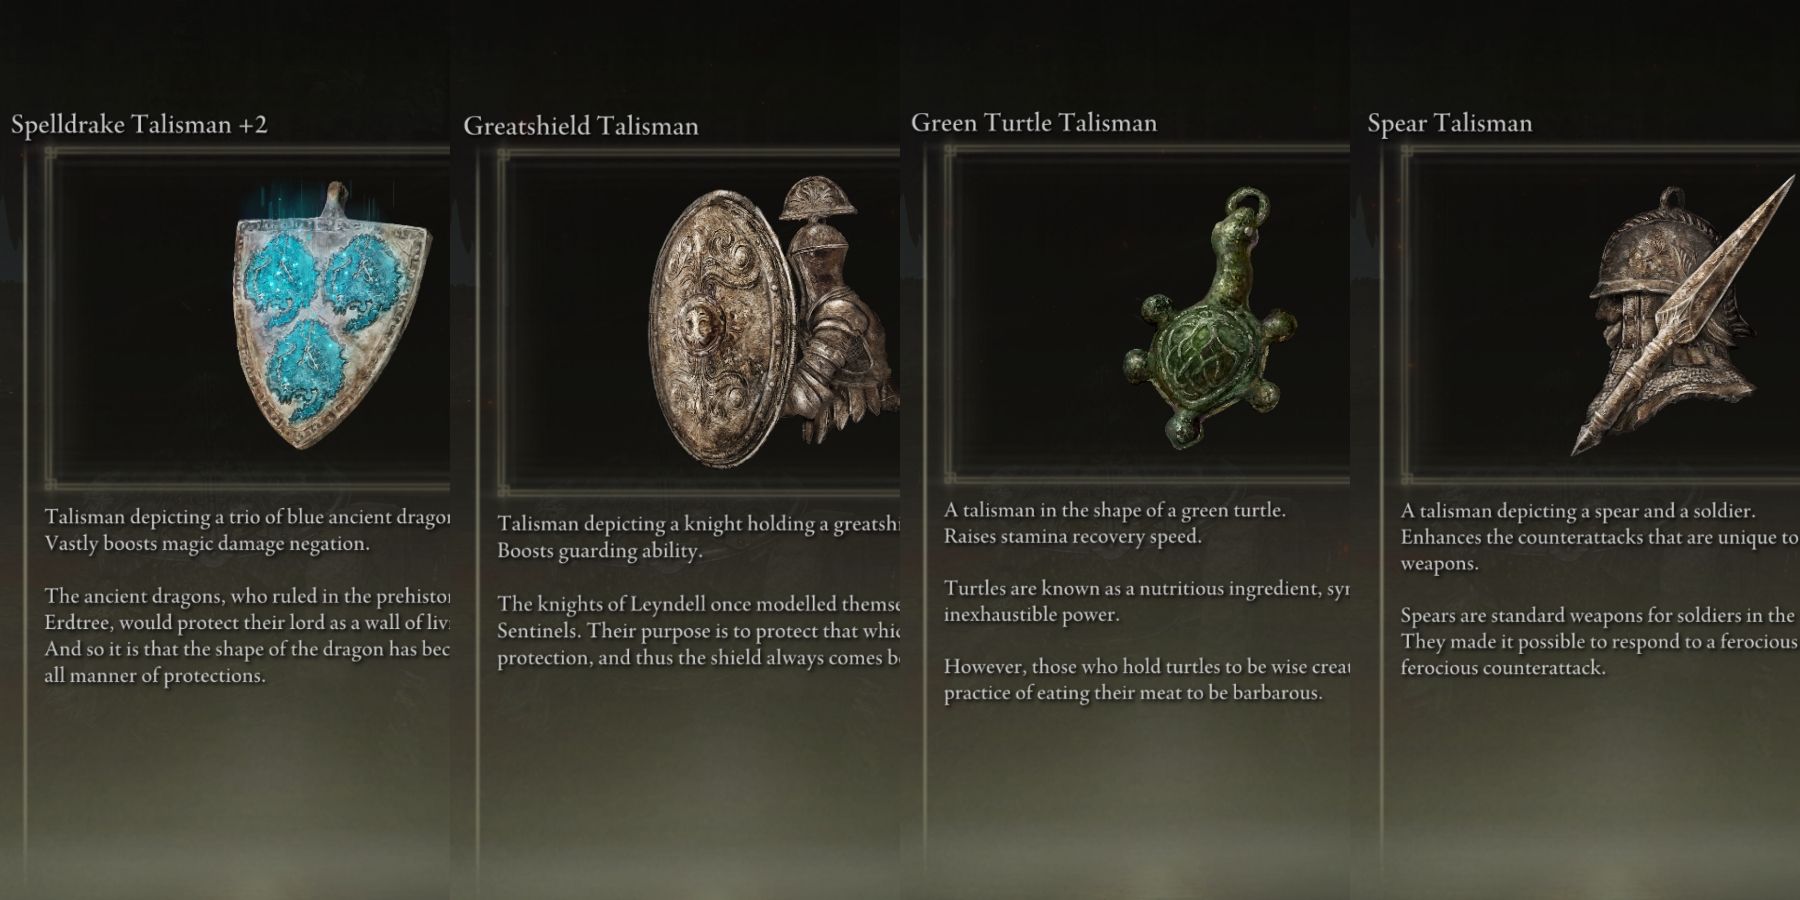 talisman combo to support spear gameplay in elden ring